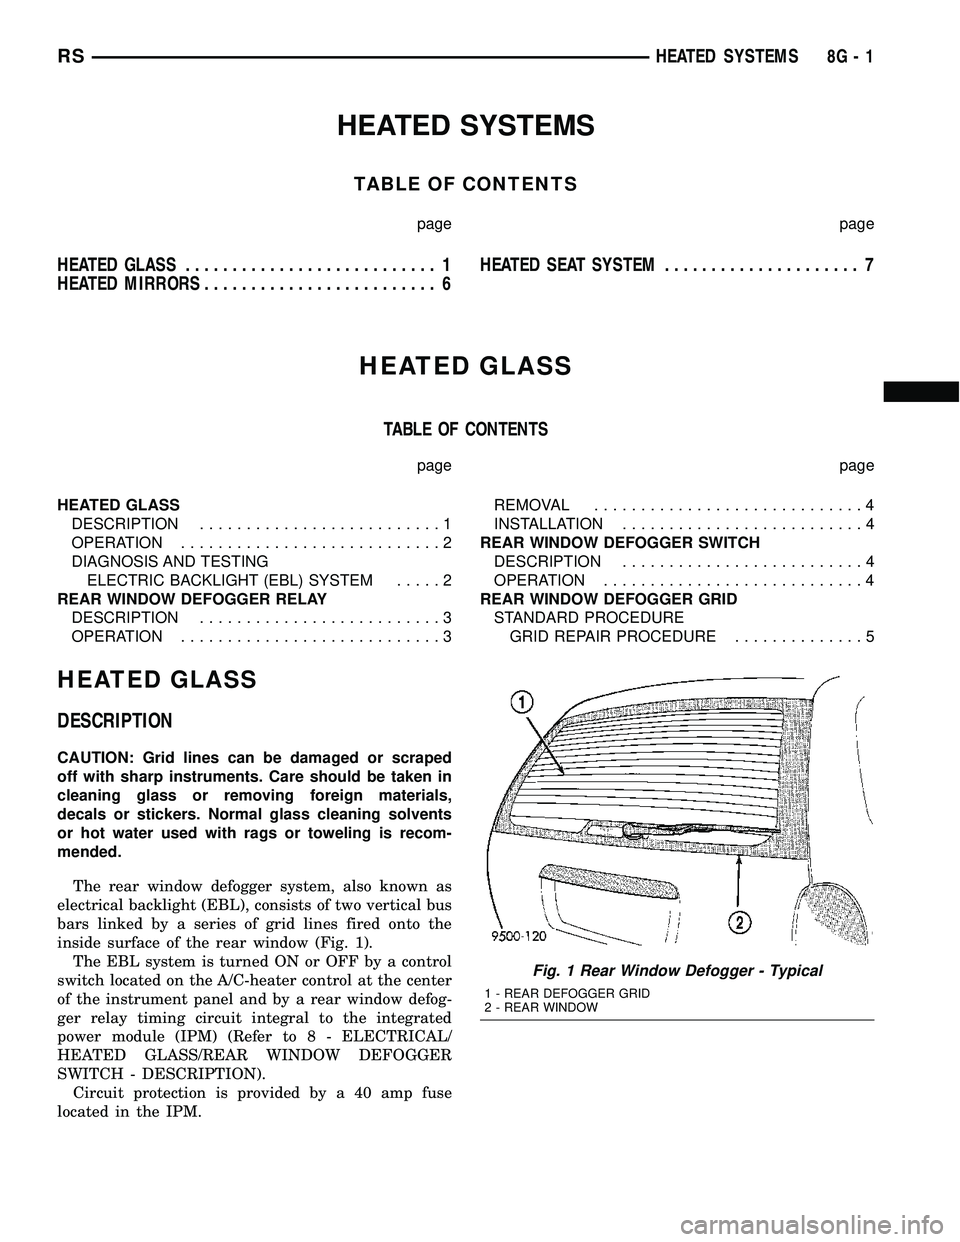 CHRYSLER CARAVAN 2005  Service Manual HEATED SYSTEMS
TABLE OF CONTENTS
page page
HEATED GLASS........................... 1
HEATED MIRRORS......................... 6HEATED SEAT SYSTEM..................... 7
HEATED GLASS
TABLE OF CONTENTS
p